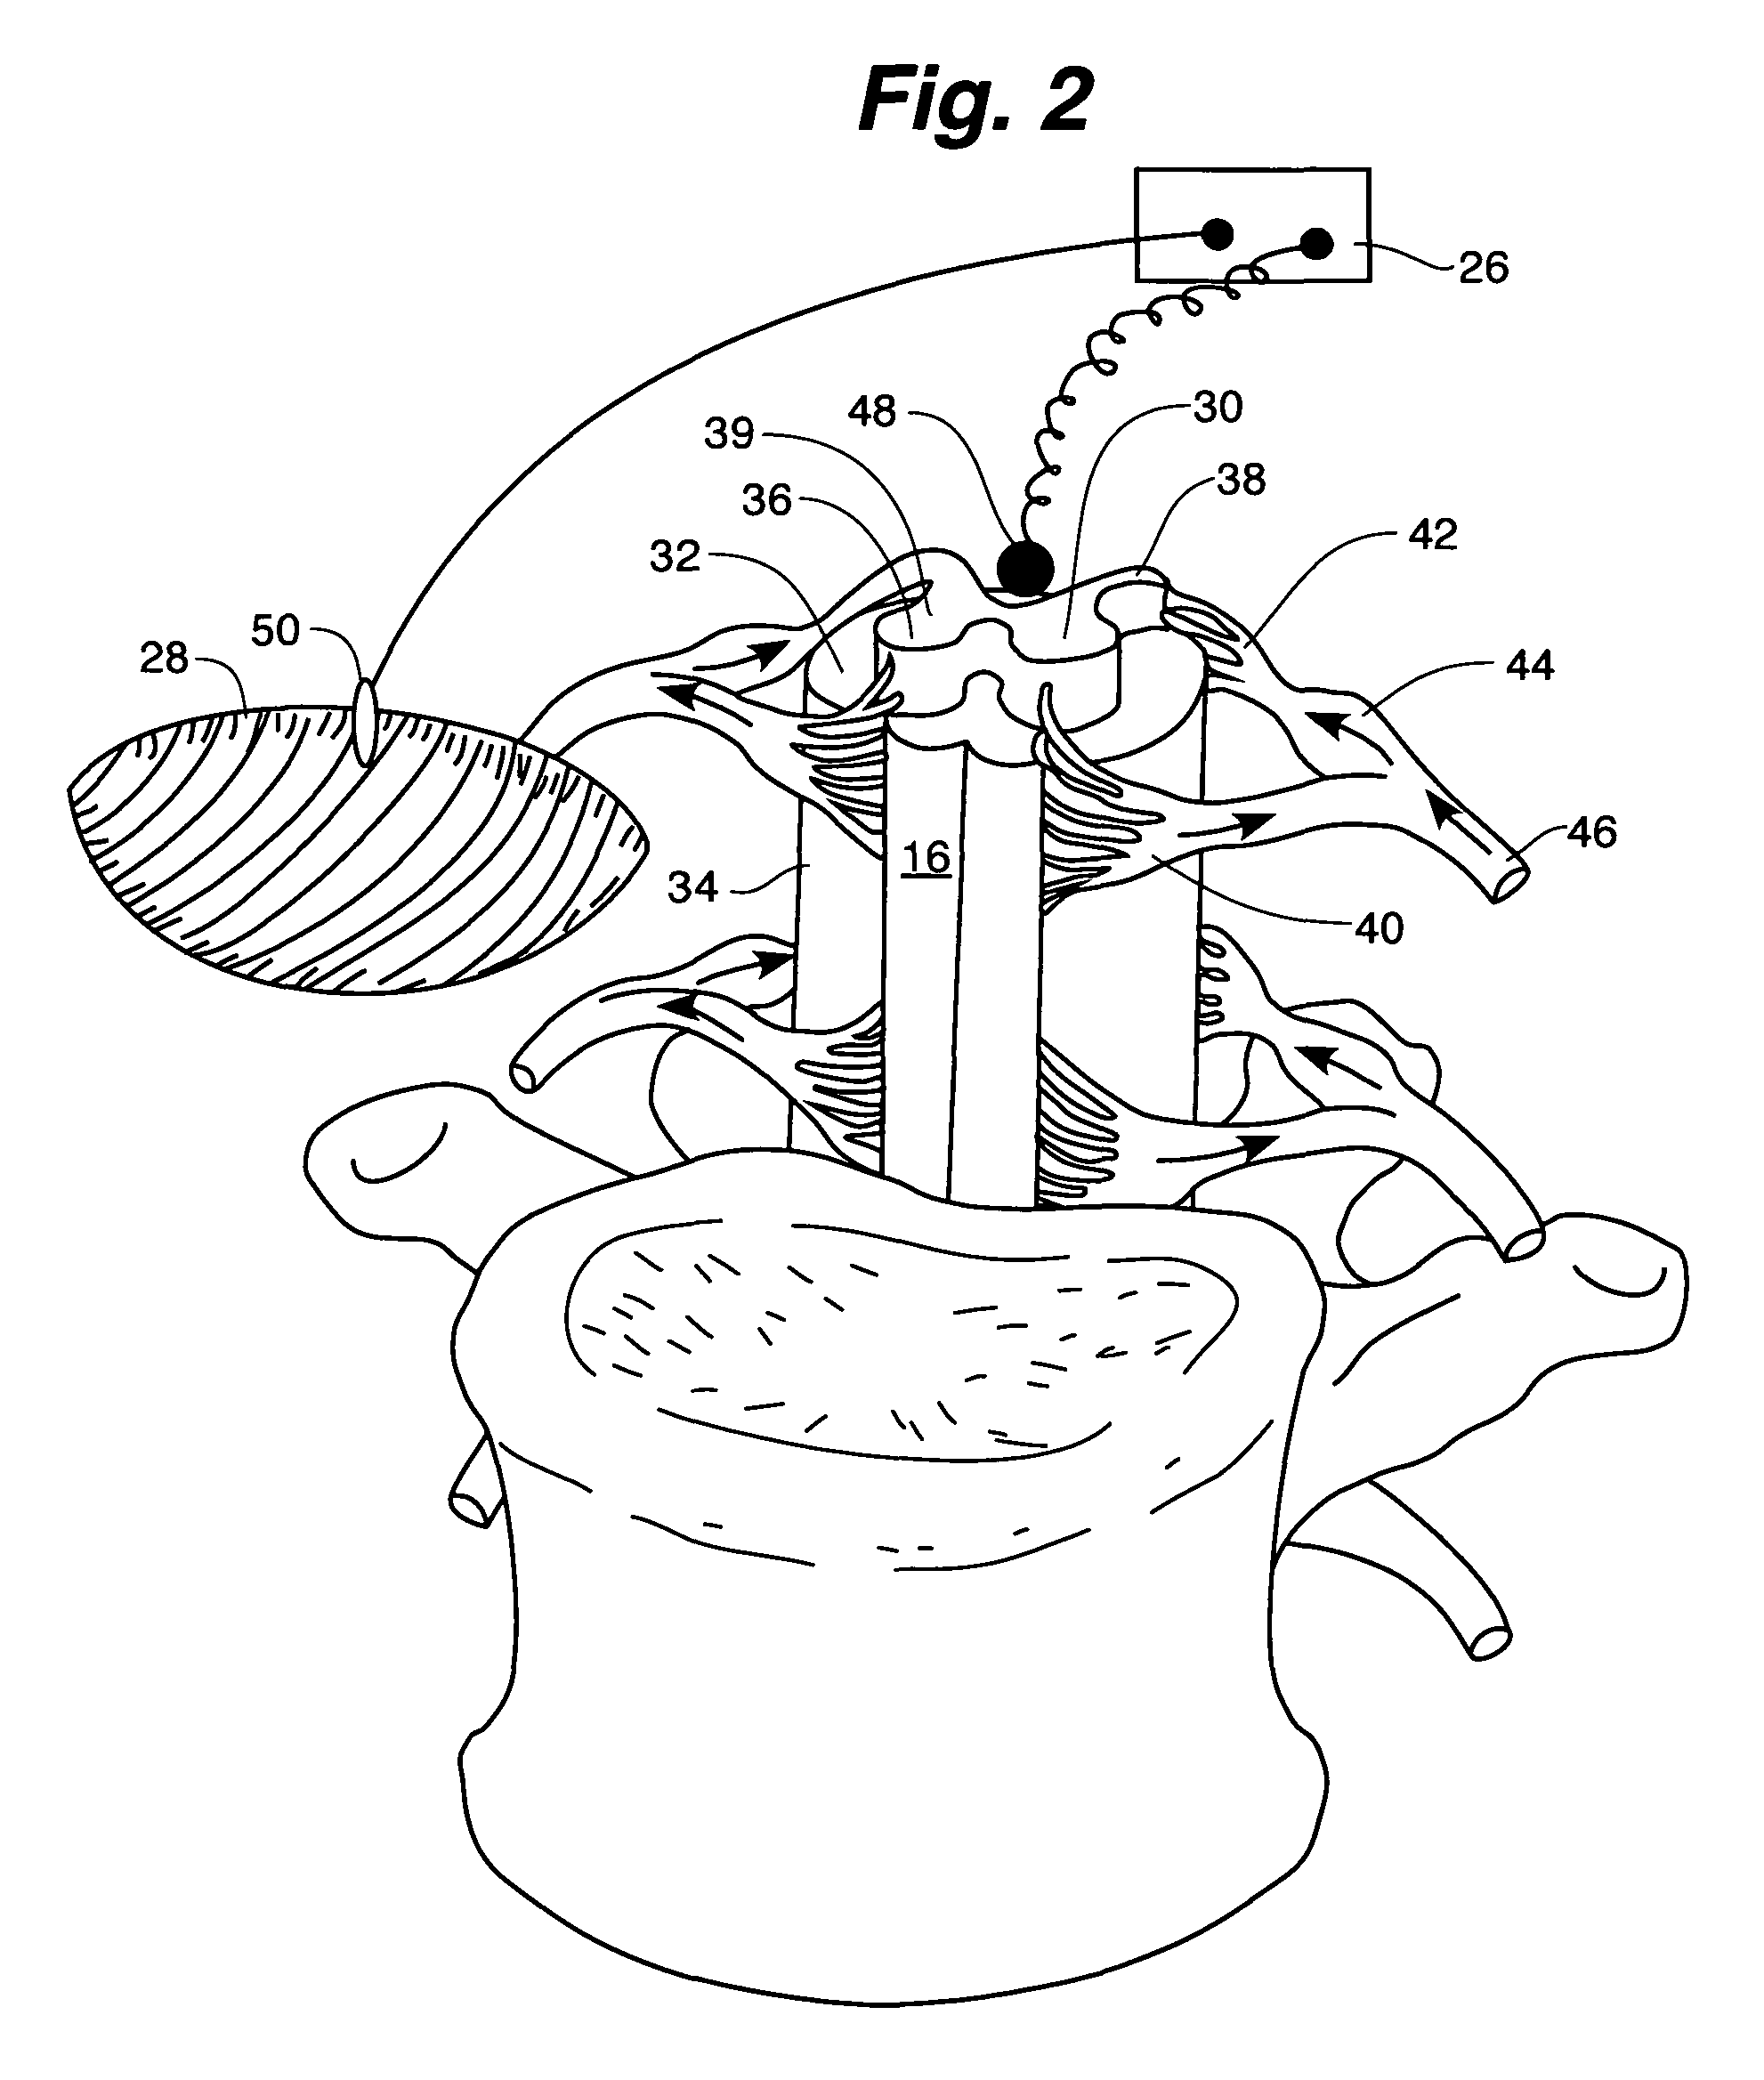 Method and apparatus for improving renal function